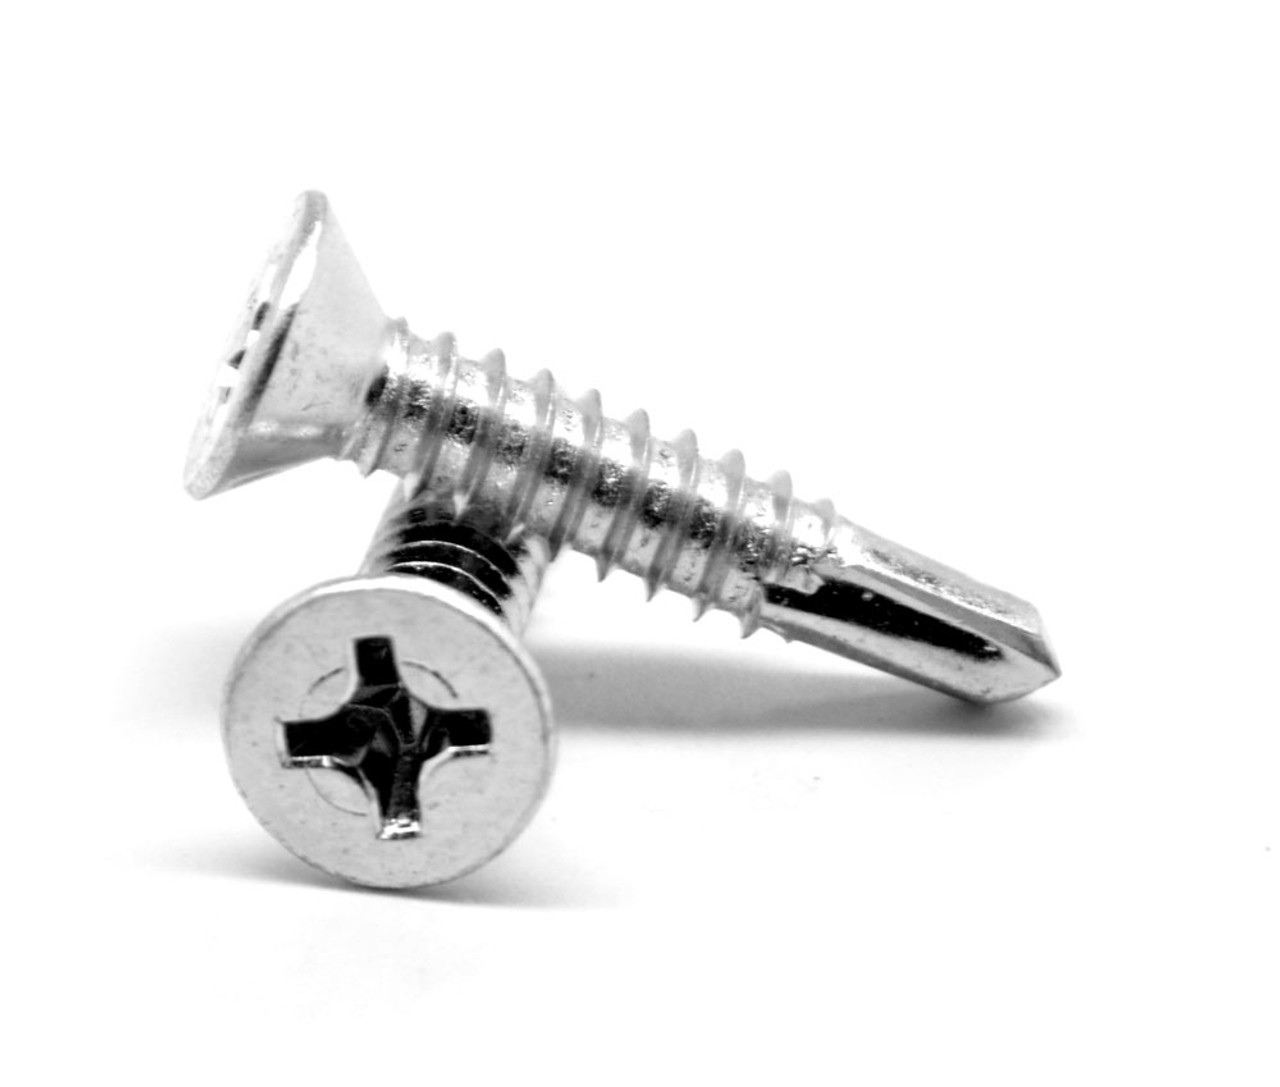 #4-24 x 5/8" (FT) Self Drilling Screw Phillips Flat Head #2 Point Low Carbon Steel Zinc Plated